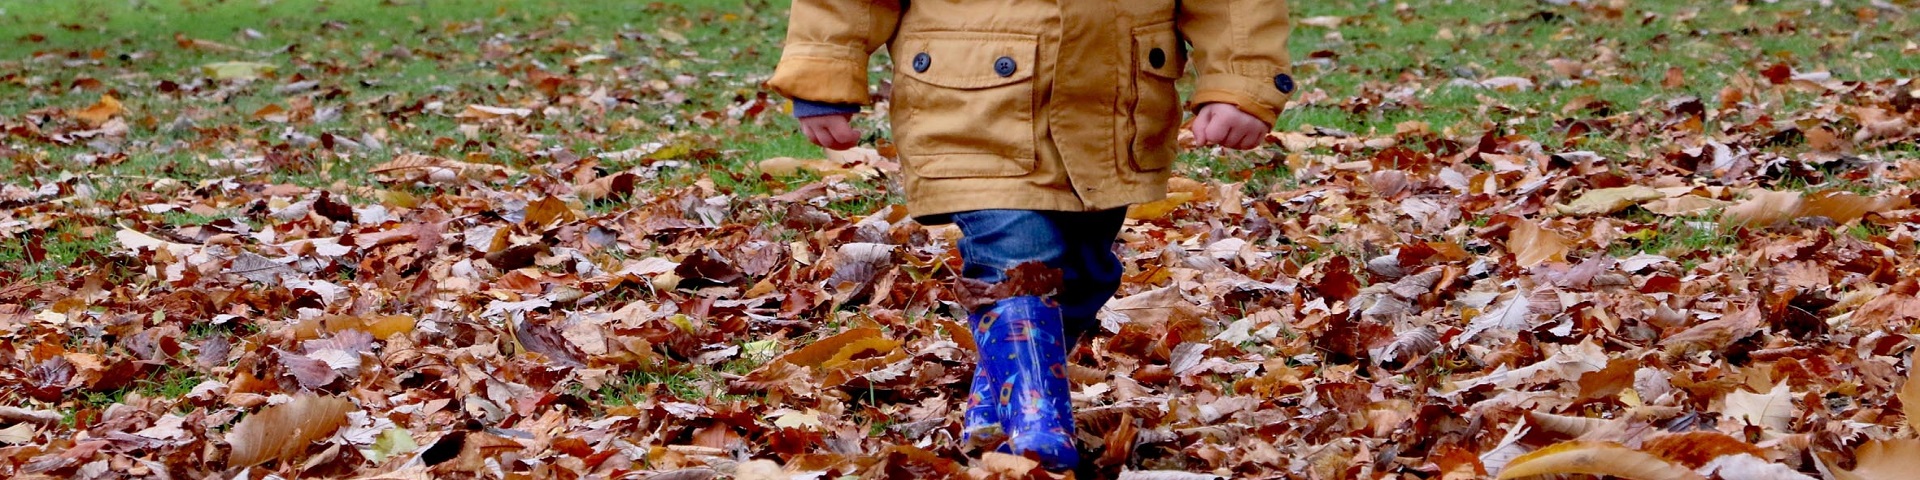 Child playing in autumn leaves